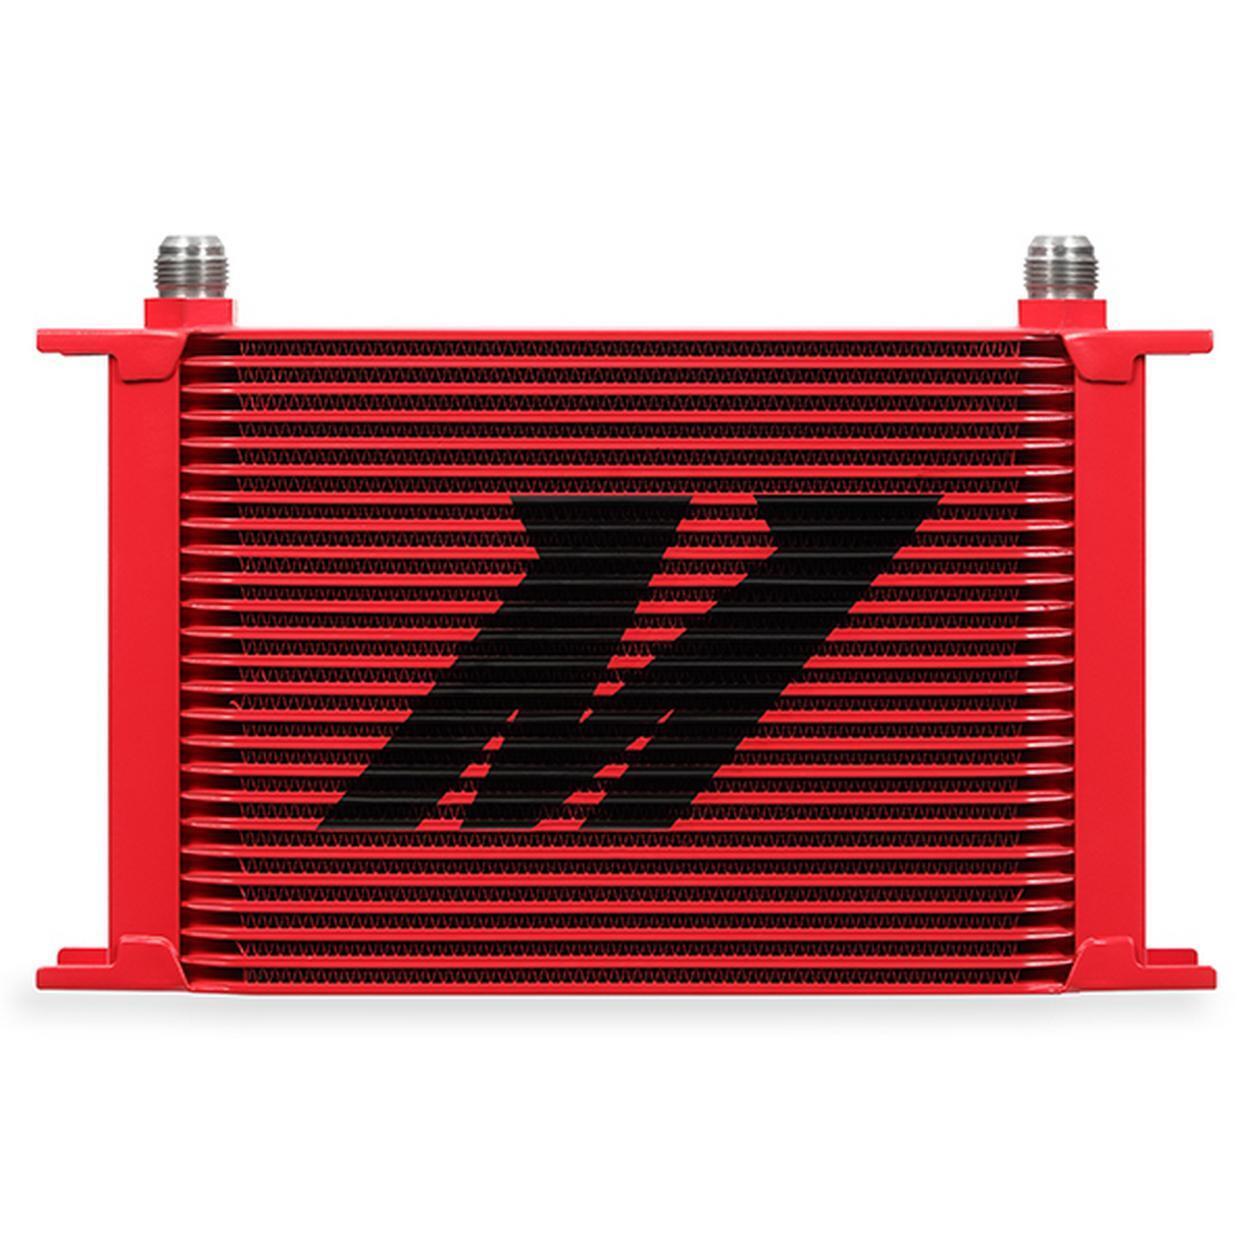 Mishimoto MMOC-25RD Universal 25-Row Oil Cooler, Red